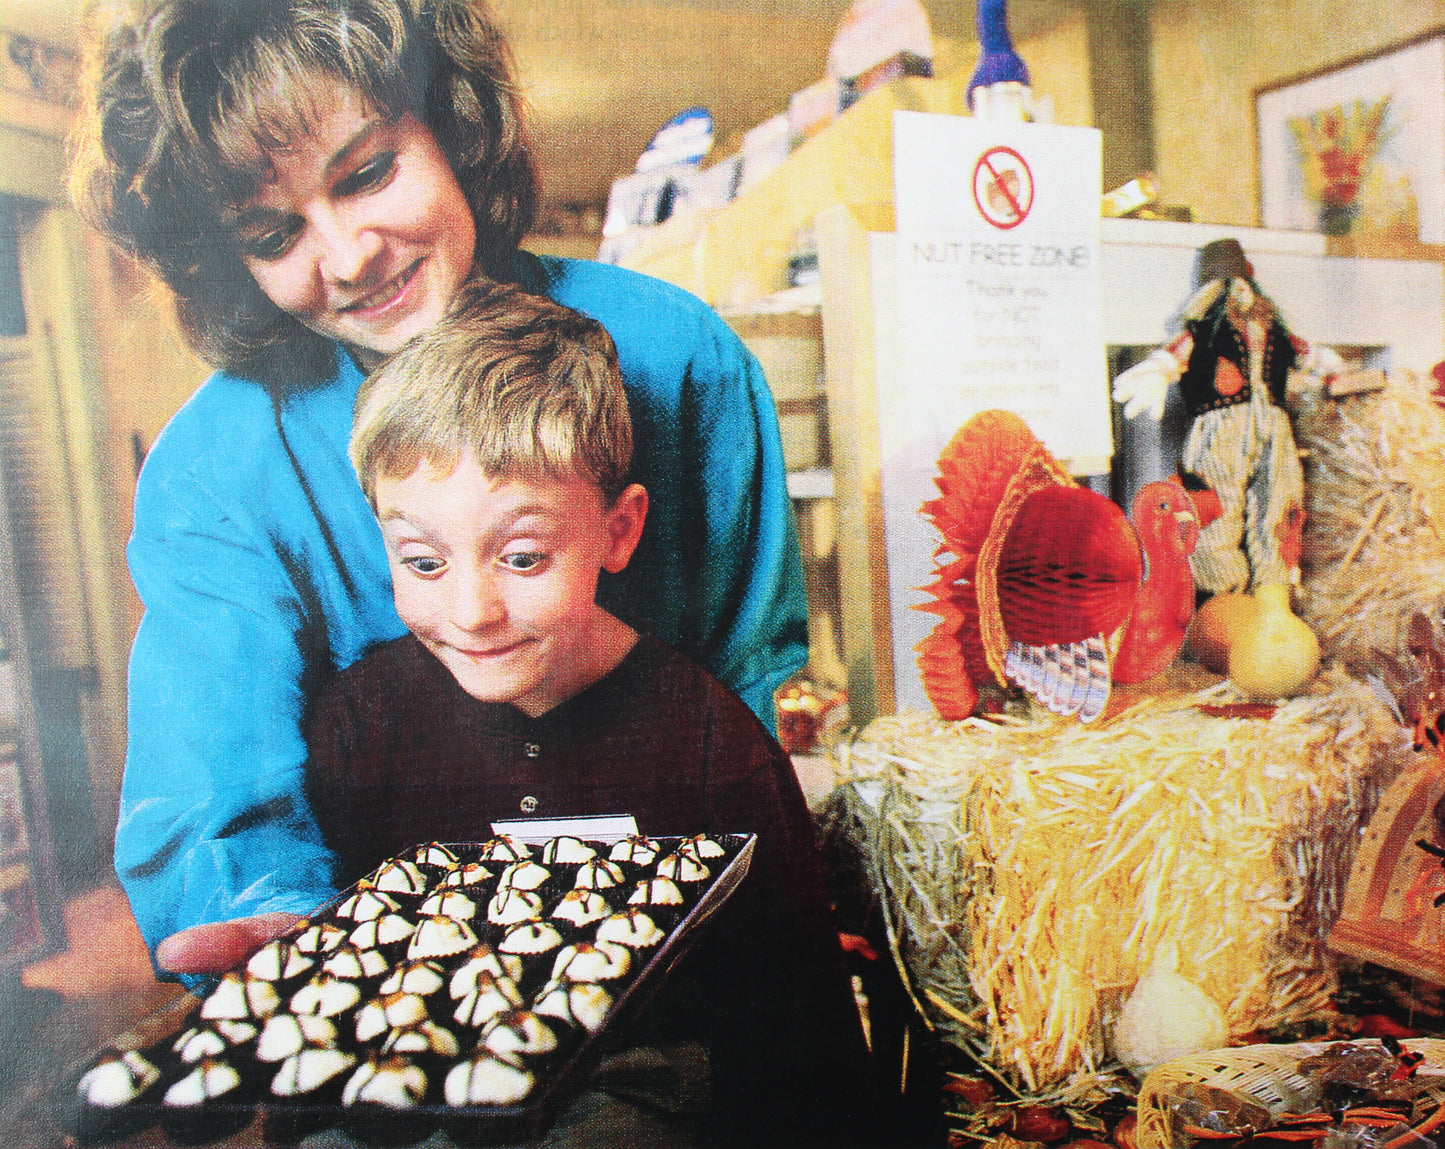 Woman and child admiring a box of truffles. "Nut Free Zone" sign in background.